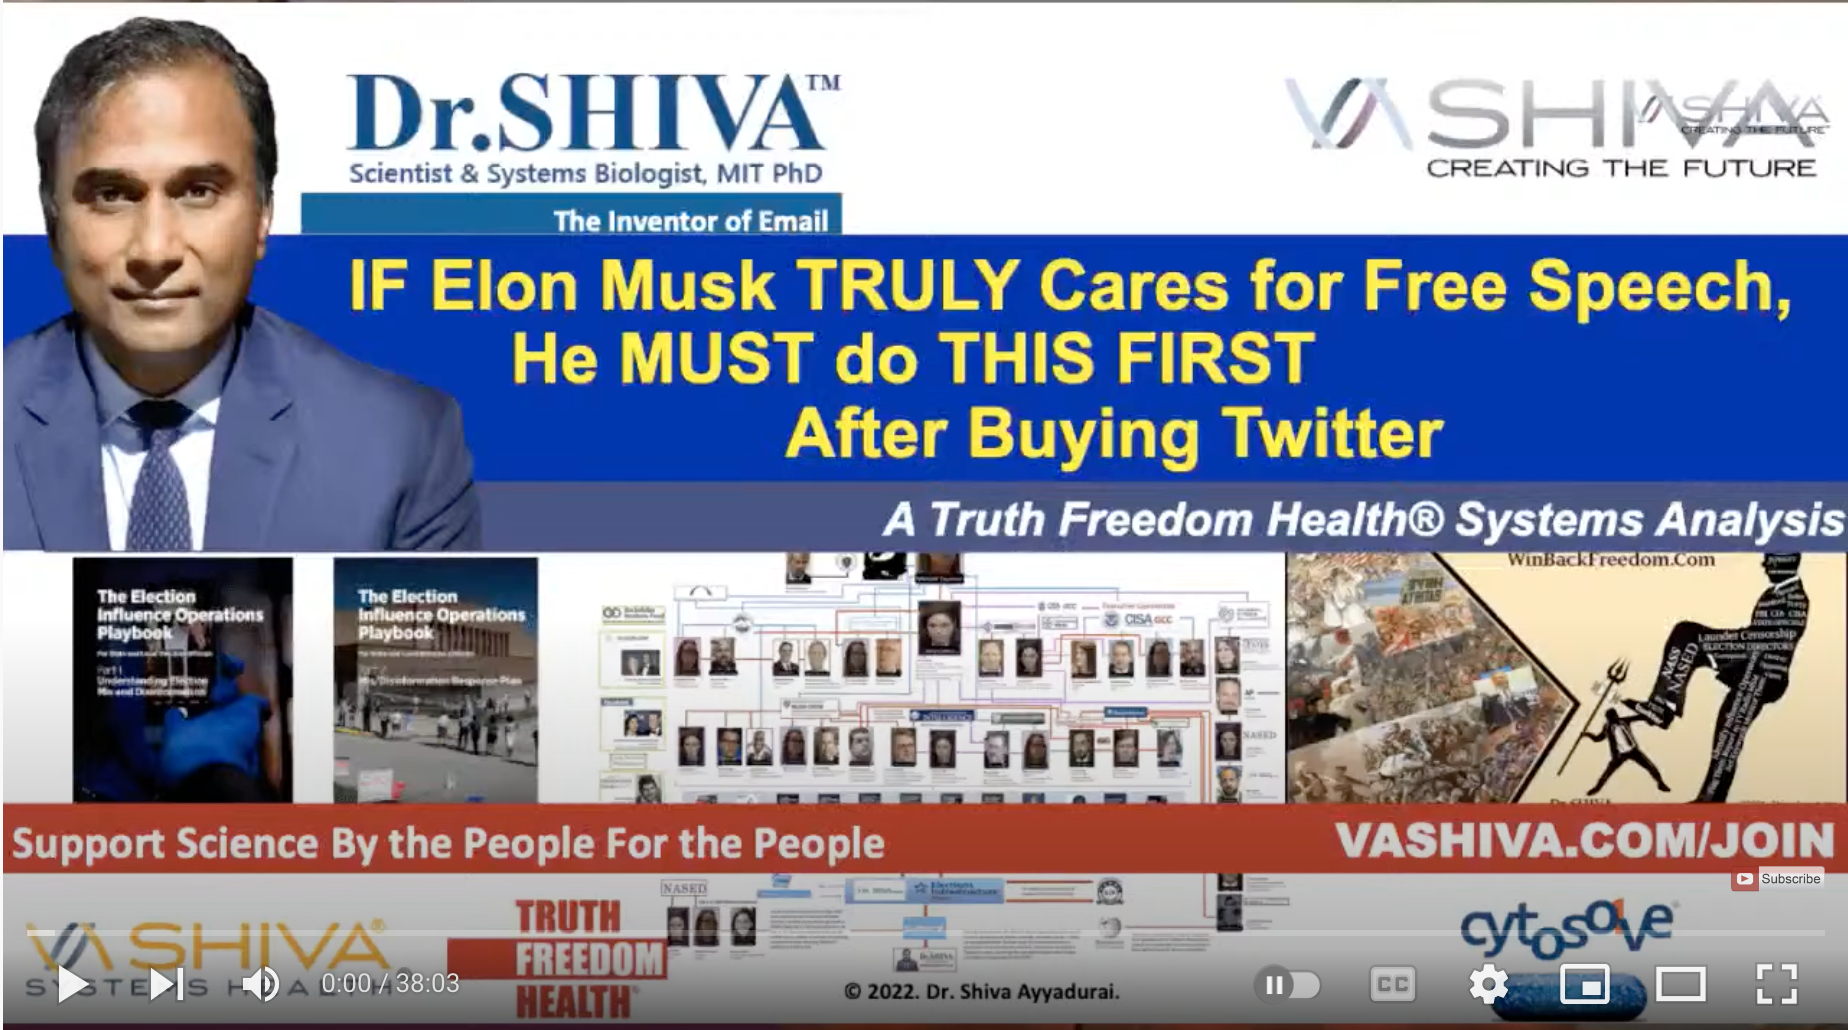 Dr.SHIVA LIVE: IF Elon Musk TRULY Cares for Free Speech, he MUST do THIS FIRST After Buying Twitter.